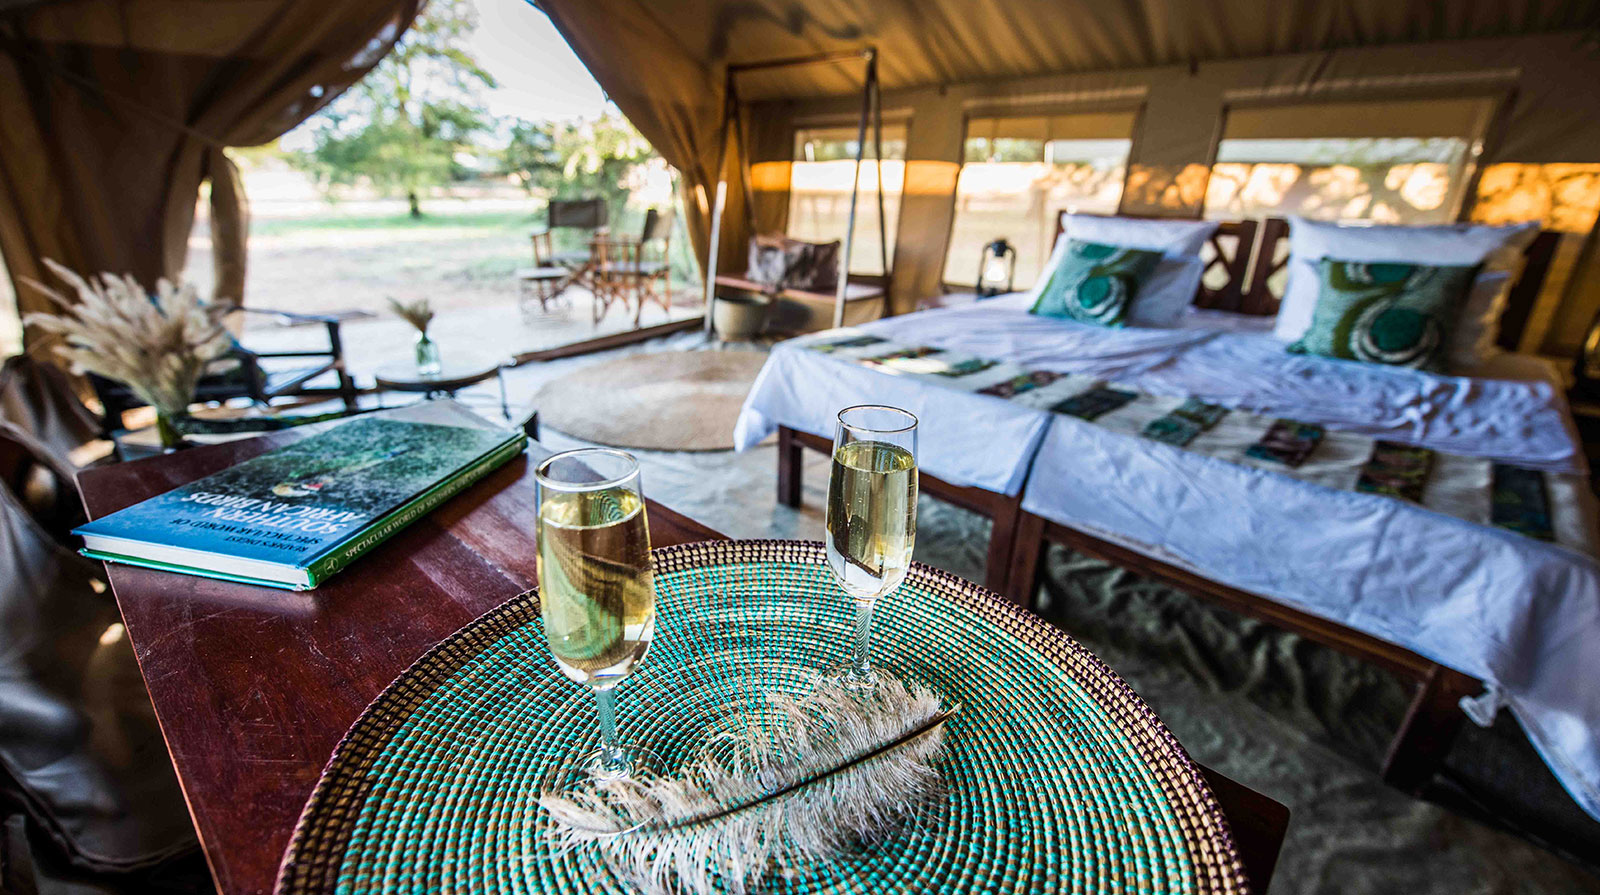 Ronjo Camp - Comfortable accommodation
